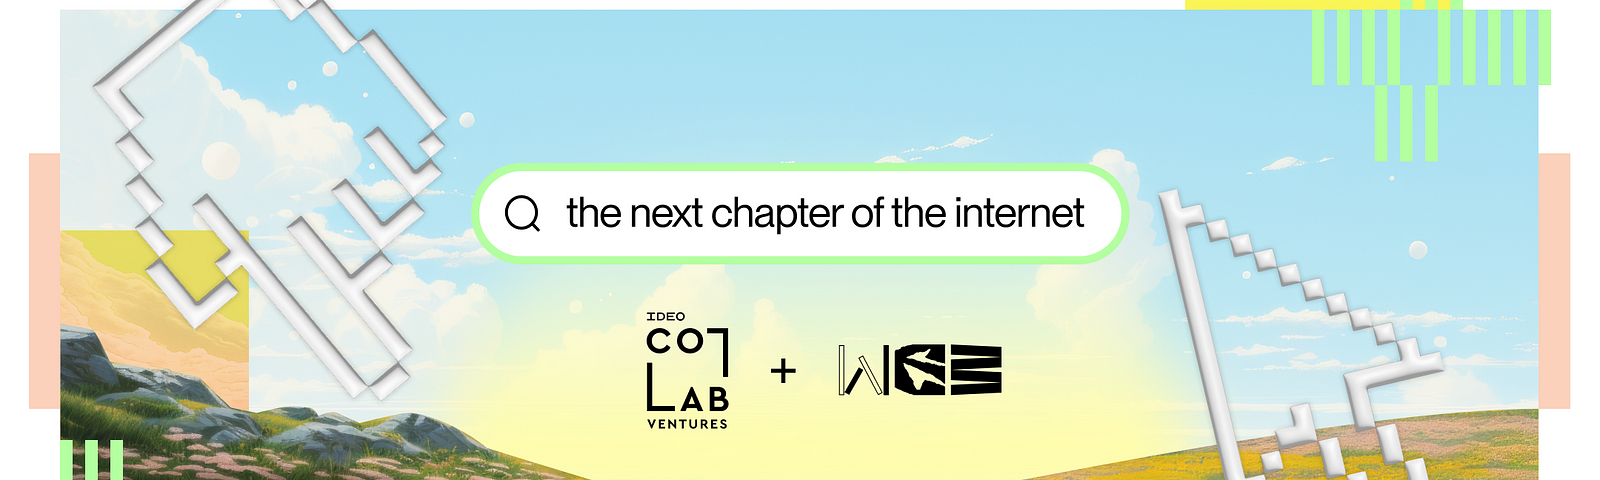 Landscape illustration overlaid with cursor elements and text “the next chapter of the internet,” with logos for IDEO CoLab Ventures and WE3.